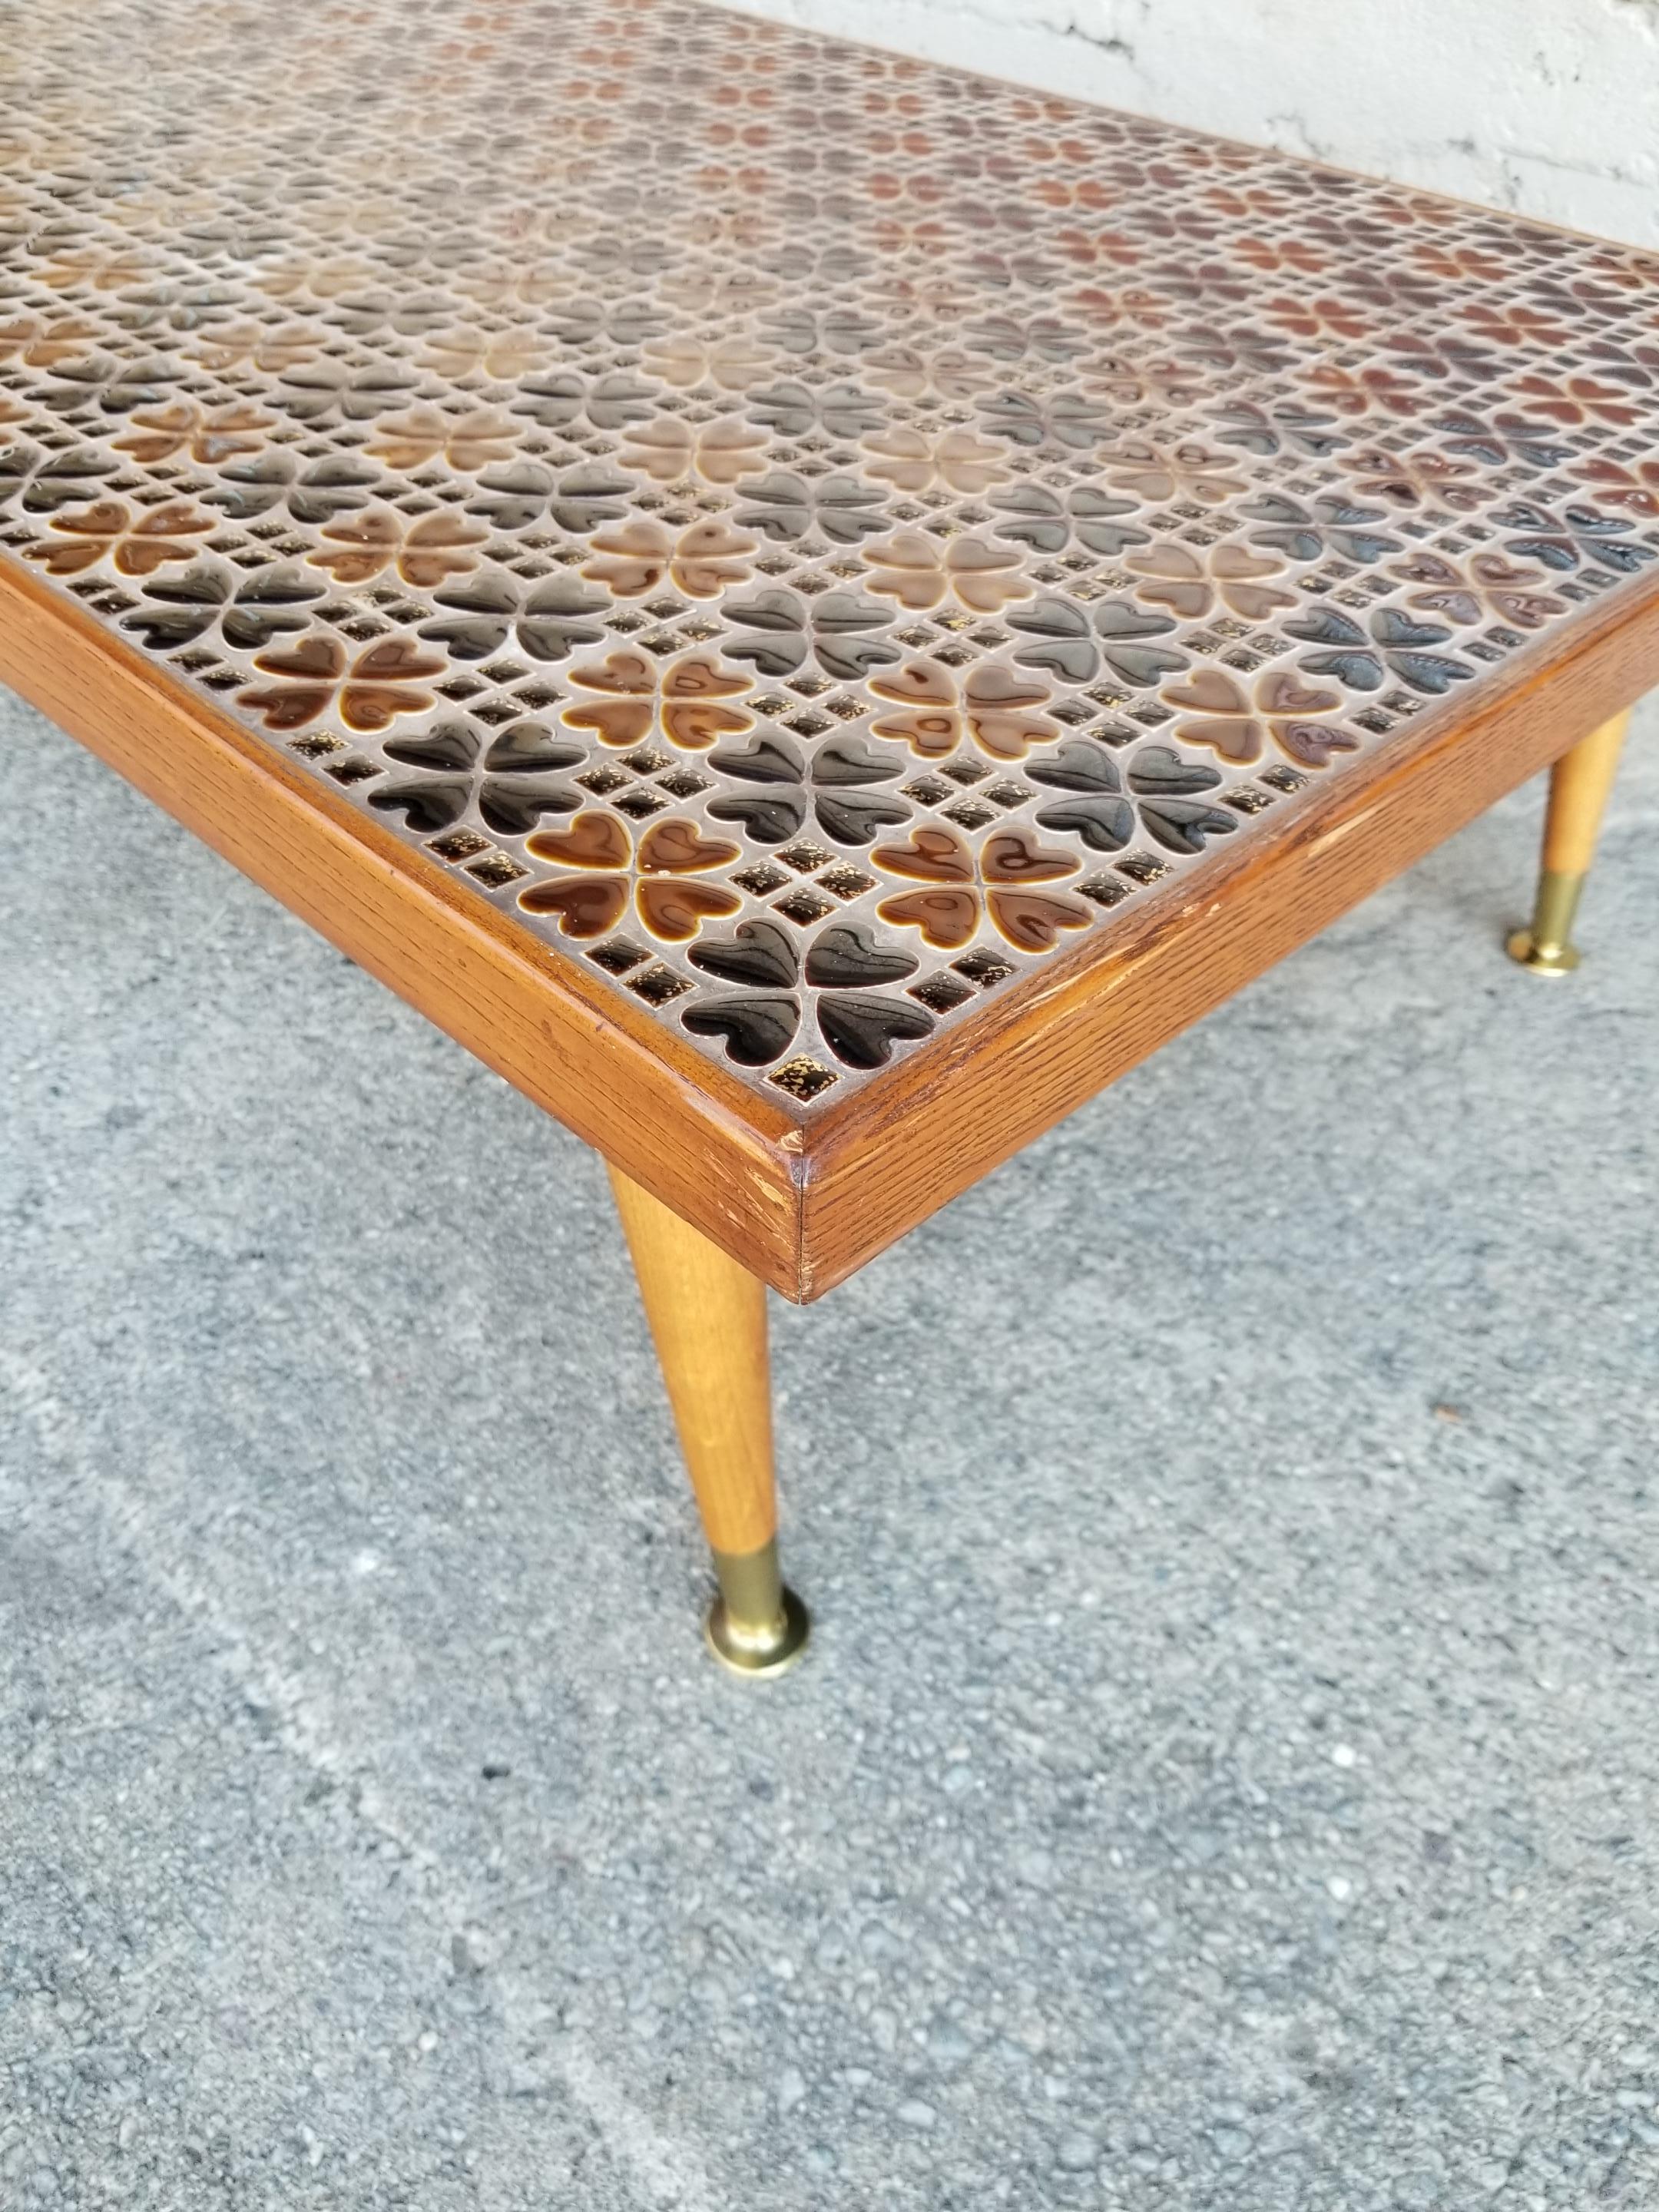 A 1960s mosaic tile top coffee table with Classic peg legs construction. Quality workmanship with expertly patterned multiple form tiles. Notice gold glitter to smallest square tiles. Warm, earth-tone organic colors. Framed in solid oak.